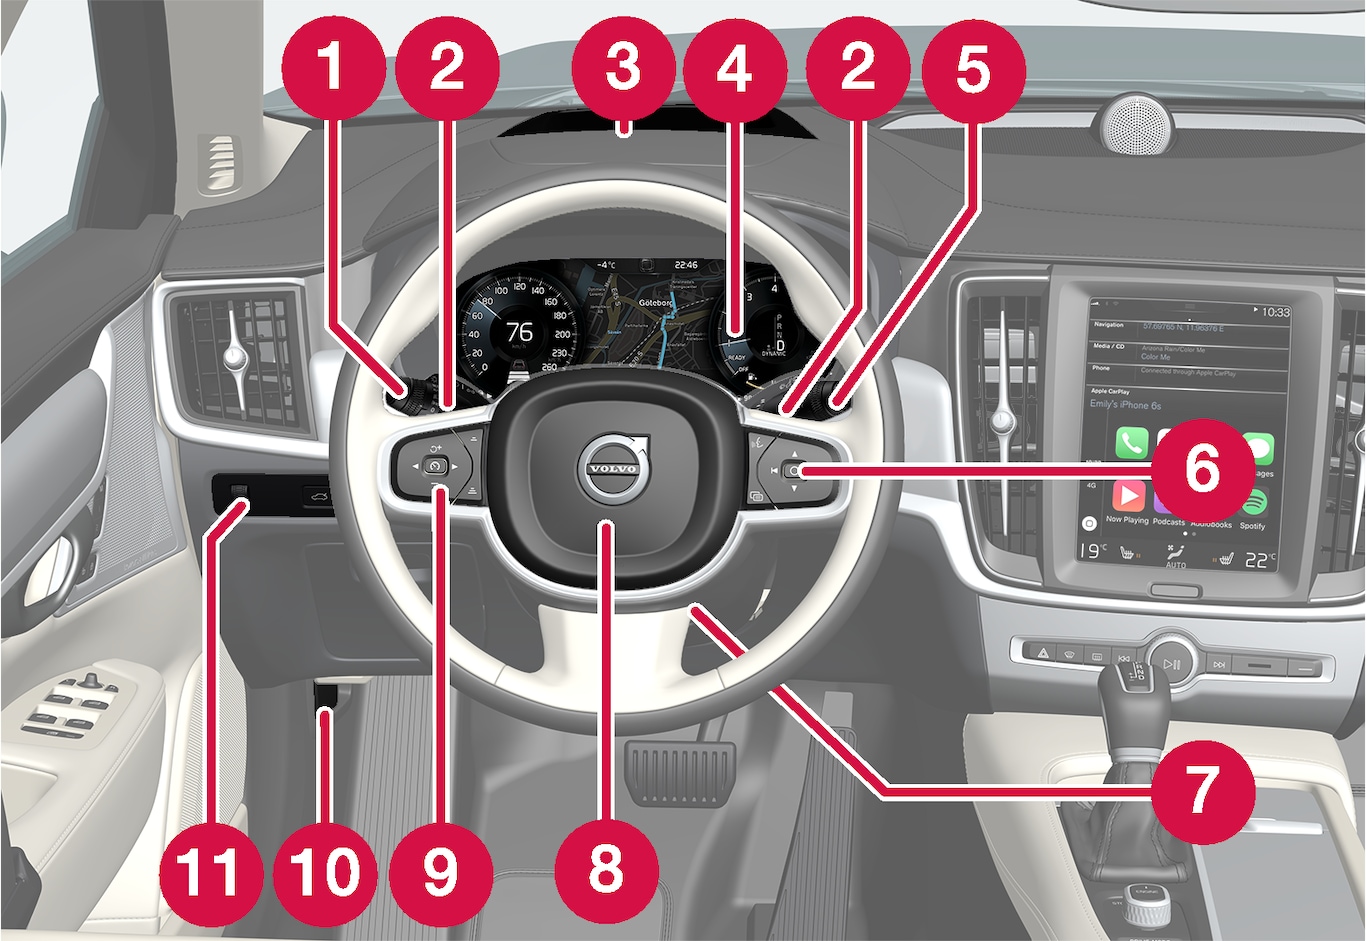 16w17-SPA-Instruments and controls 1 left hand drive